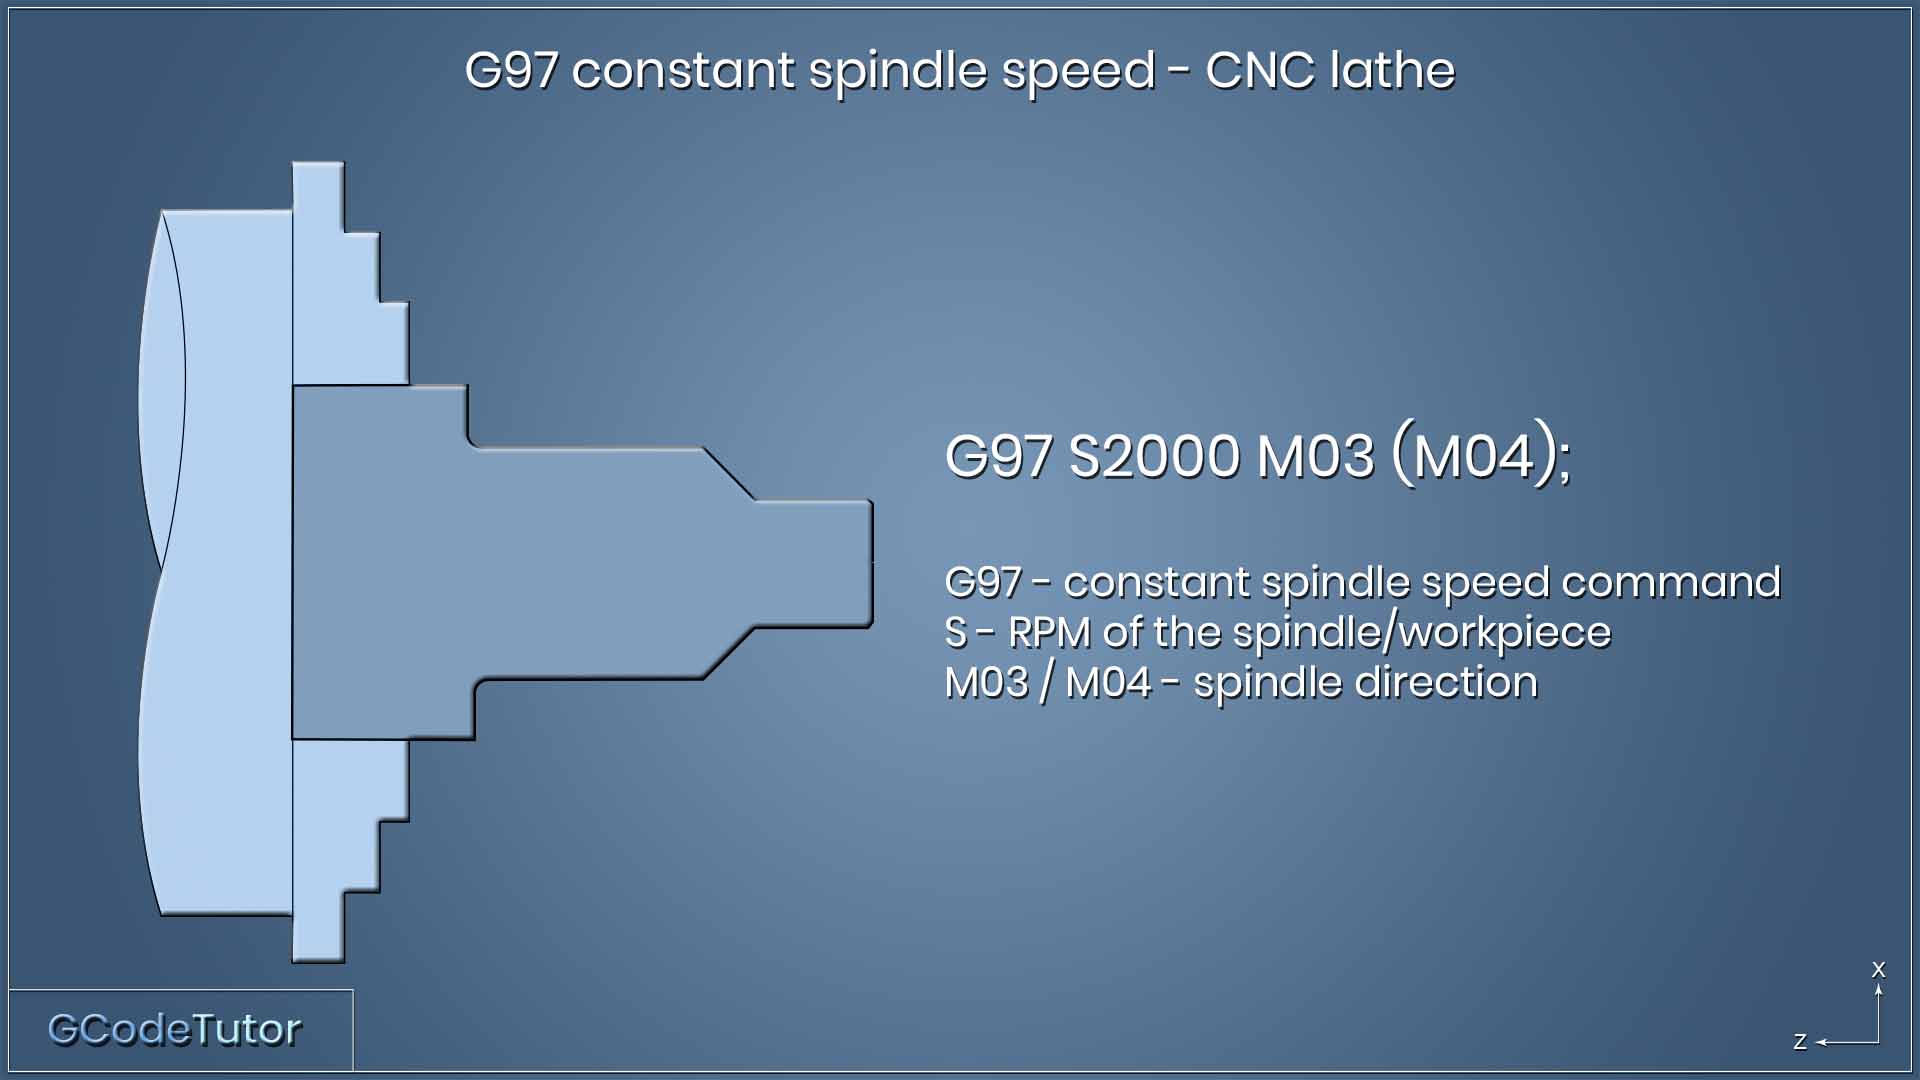 G97 constant spindle speed